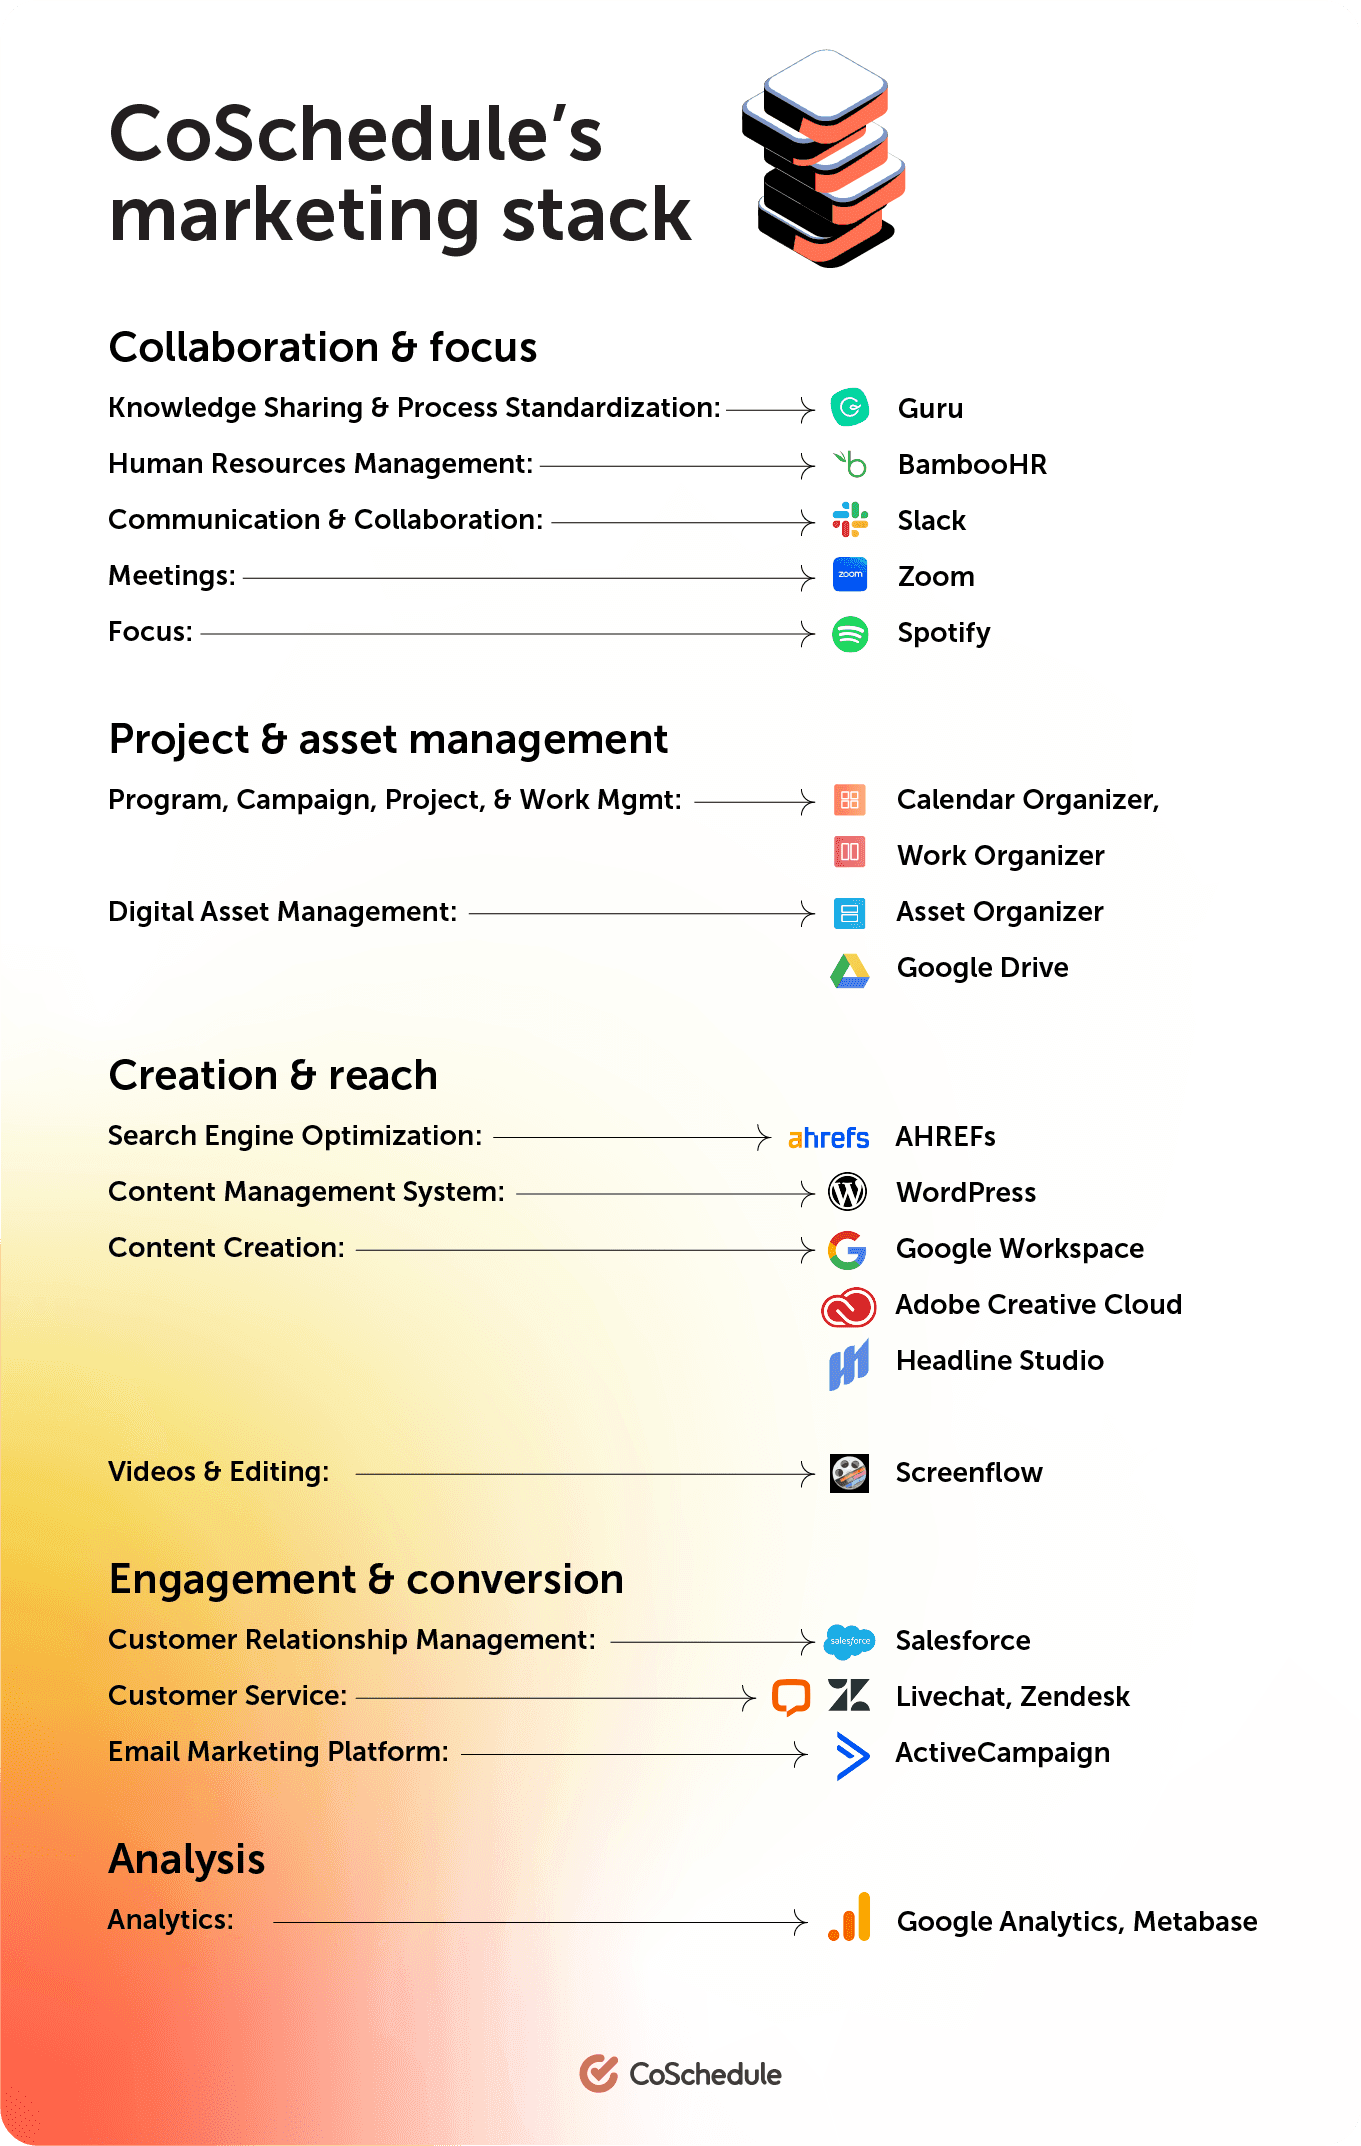 CoSchedule presents their marketing stack with categories in collaboration and focus, project and asset management, creation and reach, engagement and conversion, and analysis.